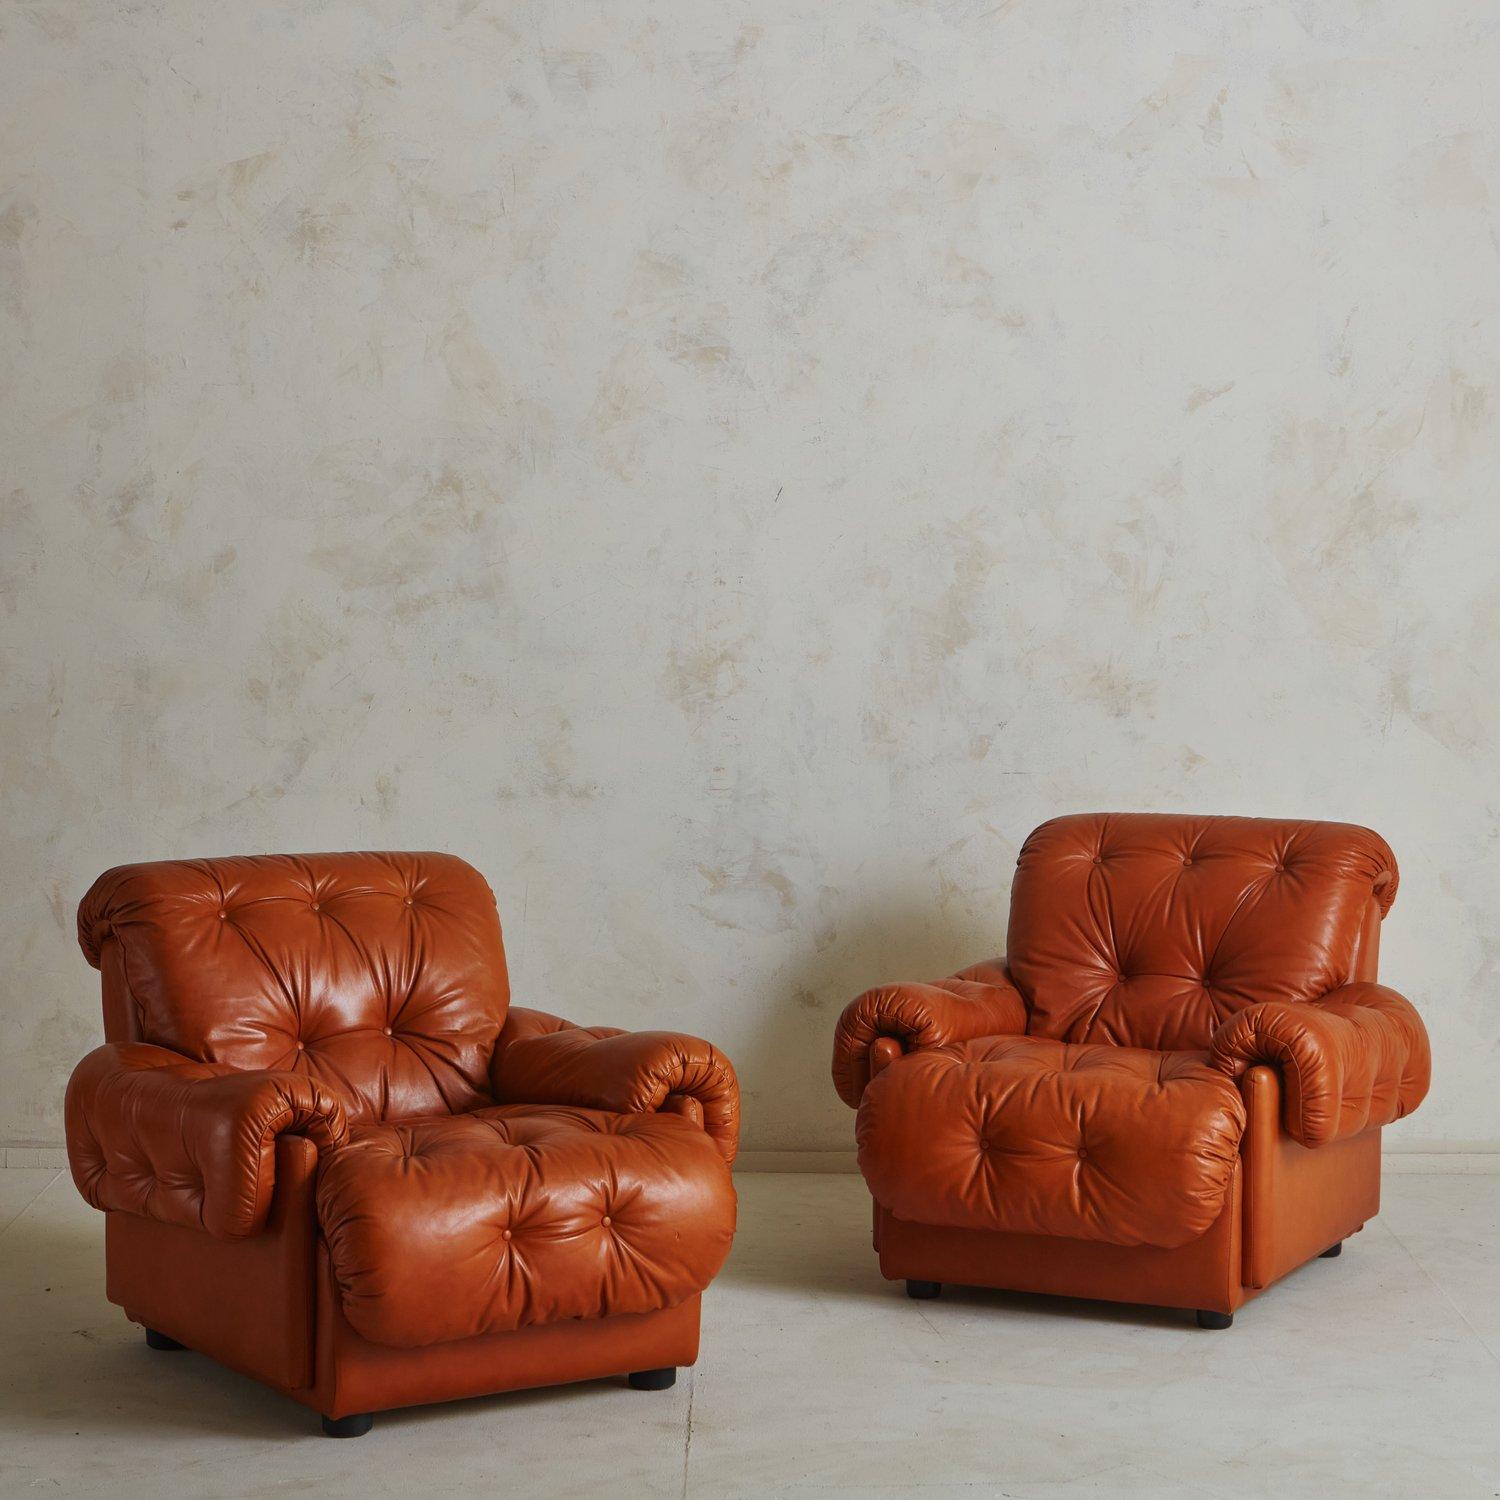 A handsome pair of 1960s Italian lounge chairs in a rich cognac leather. These stately chairs feature button tufted seat backs, cushions and arms, which drape beautifully over the angular frame. They have ruched detailing along the edges and stand